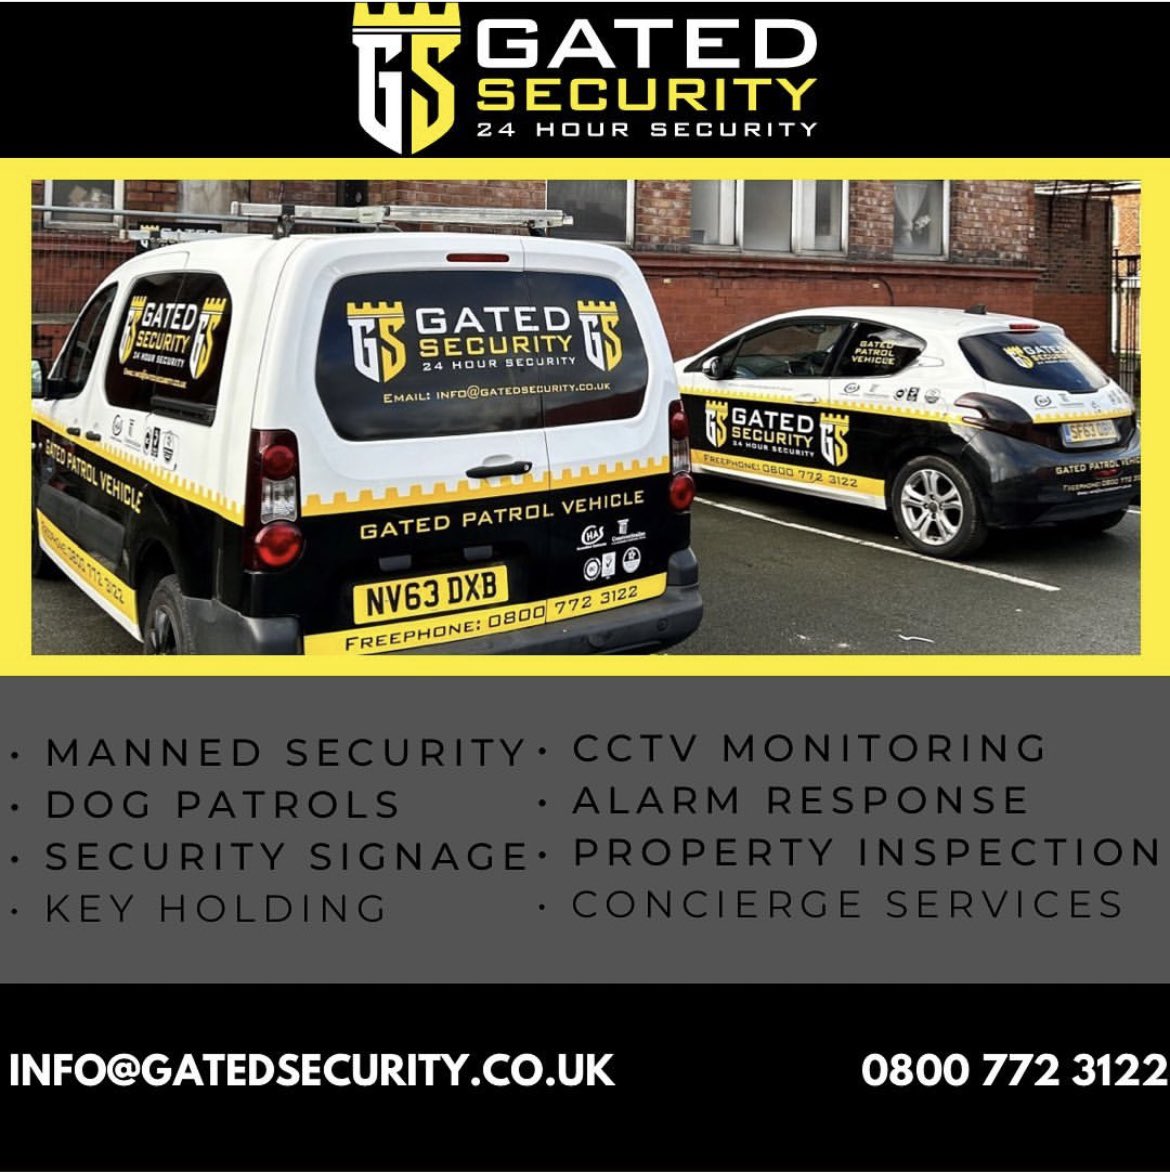 For all security requirements please contact 08007723122 or email info@gatedsecurity.co.uk 

#GatedSecurity #24hr #KeyHolding #MobilPatrols #Signs #MannedGuard #Retail #Concierge #WakingWatch #FireMarshalls #CCTV #DogPatrols #DoorStaff #Events